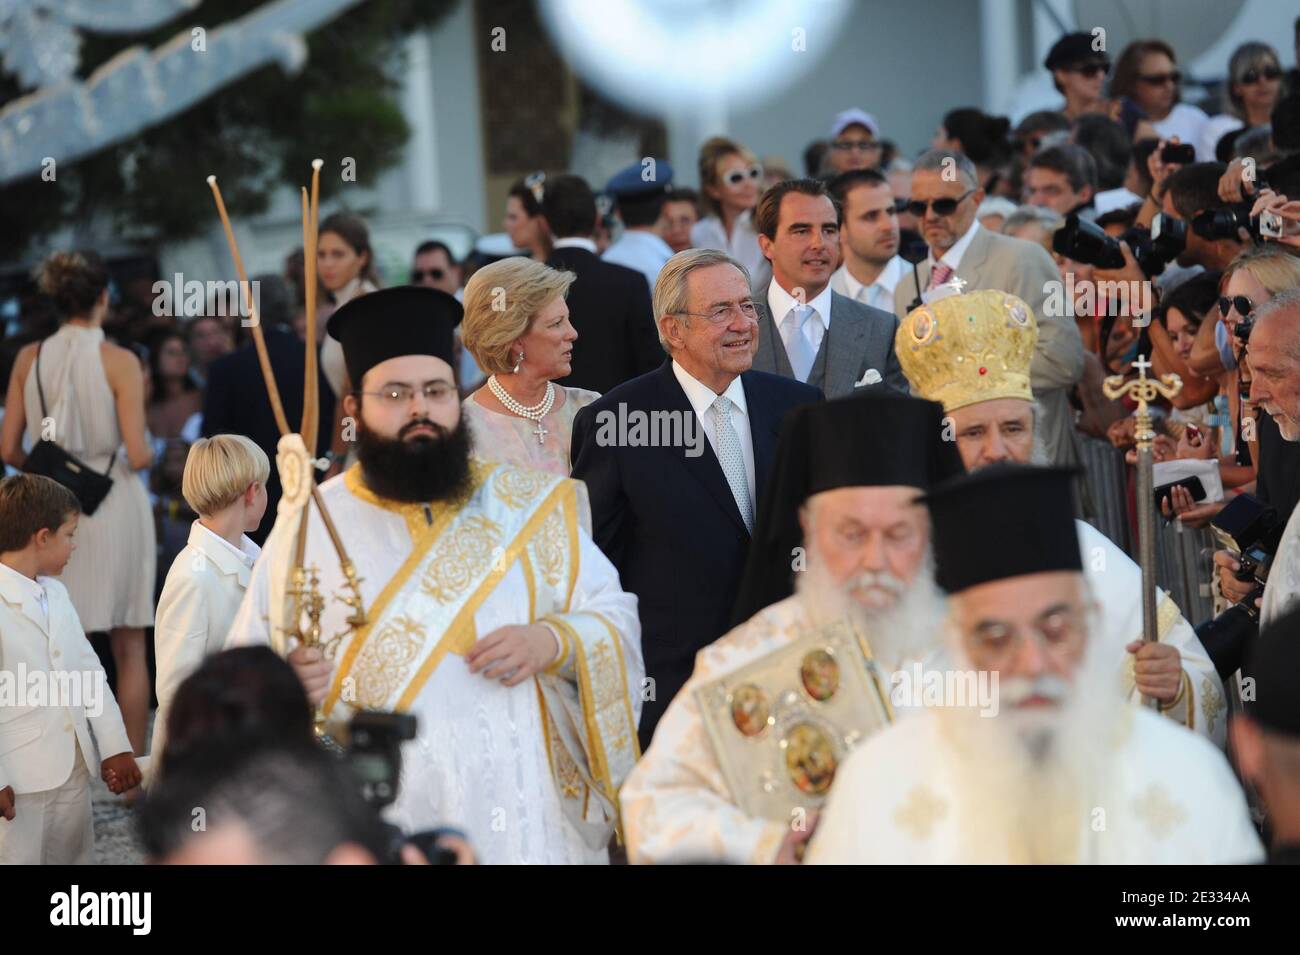 King Constantine and Queen Anne-Marie of Greece arrive for the wedding of Prince Nikolaos of Greece and Tatiana Blatnik at the Orthodox Church of Ayios Nikolaos (St. Nicholas) on Spetses Island, Greece on August 25, 2010. Photo by Mousse/ABACAPRESS.COM Stock Photo